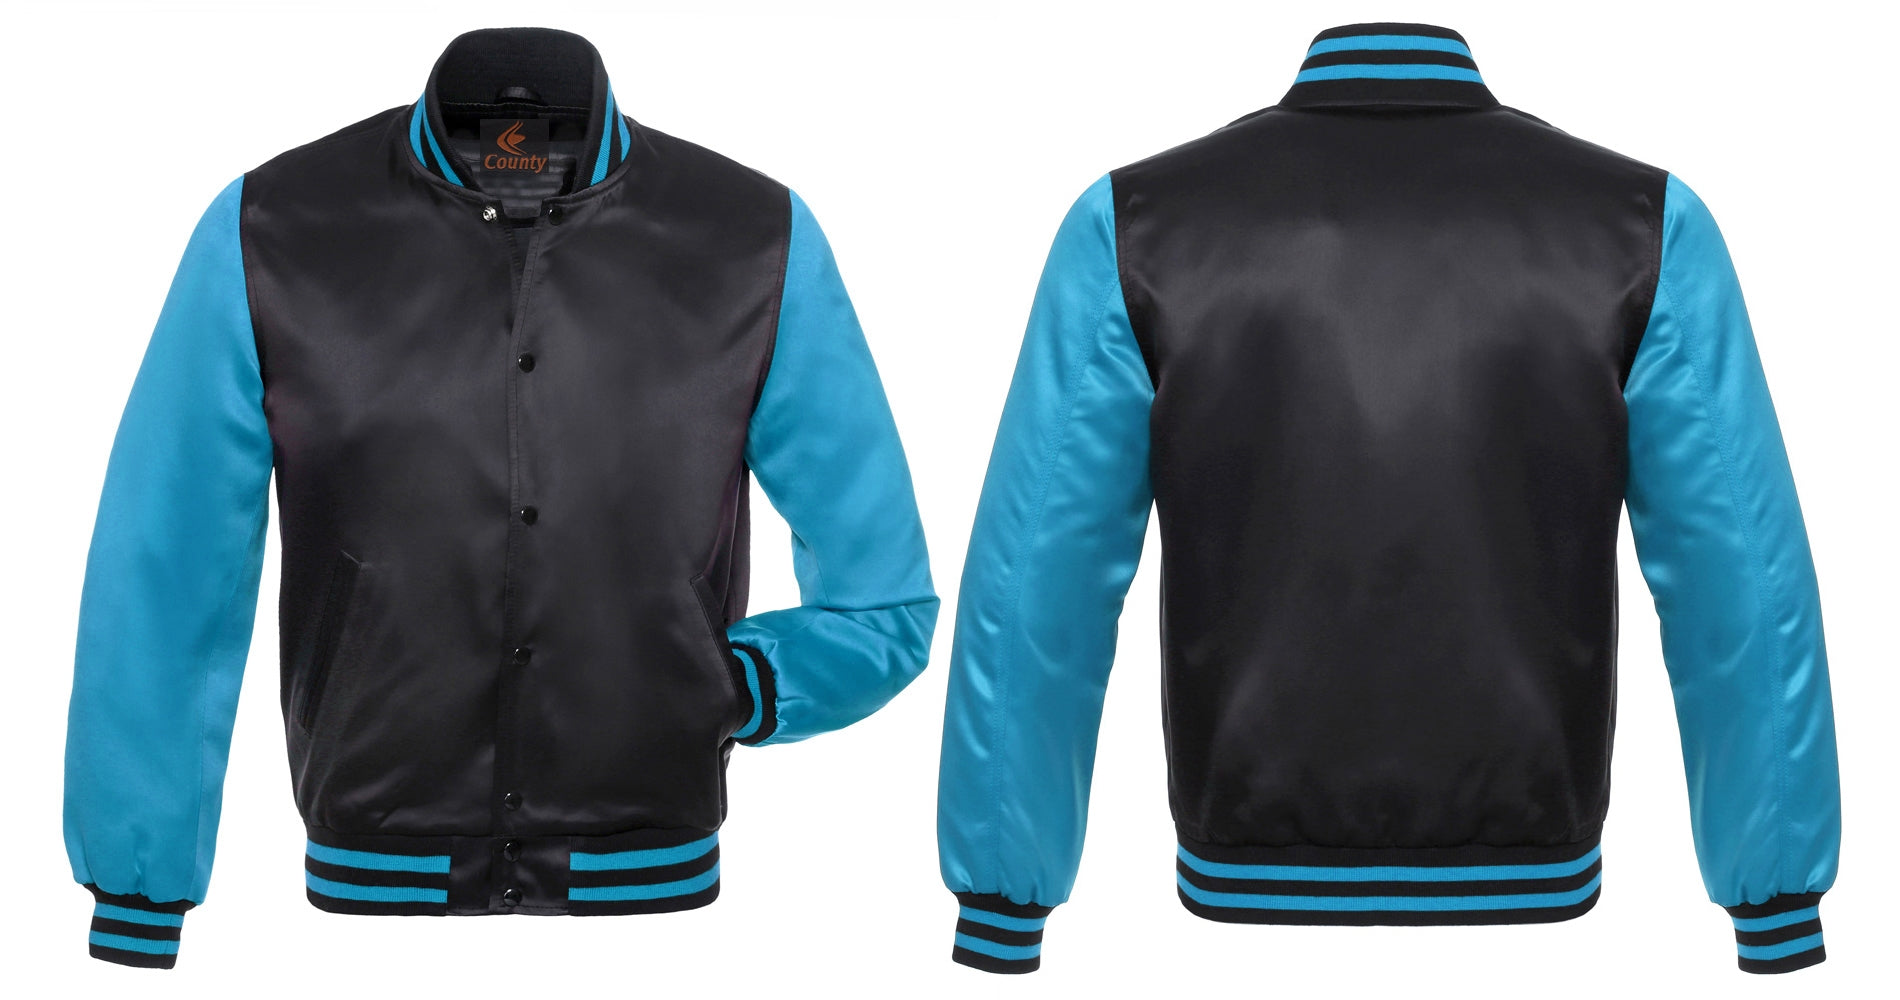 Baseball college varsity bomber jacket in black and turquoise satin, perfect for sports wear.